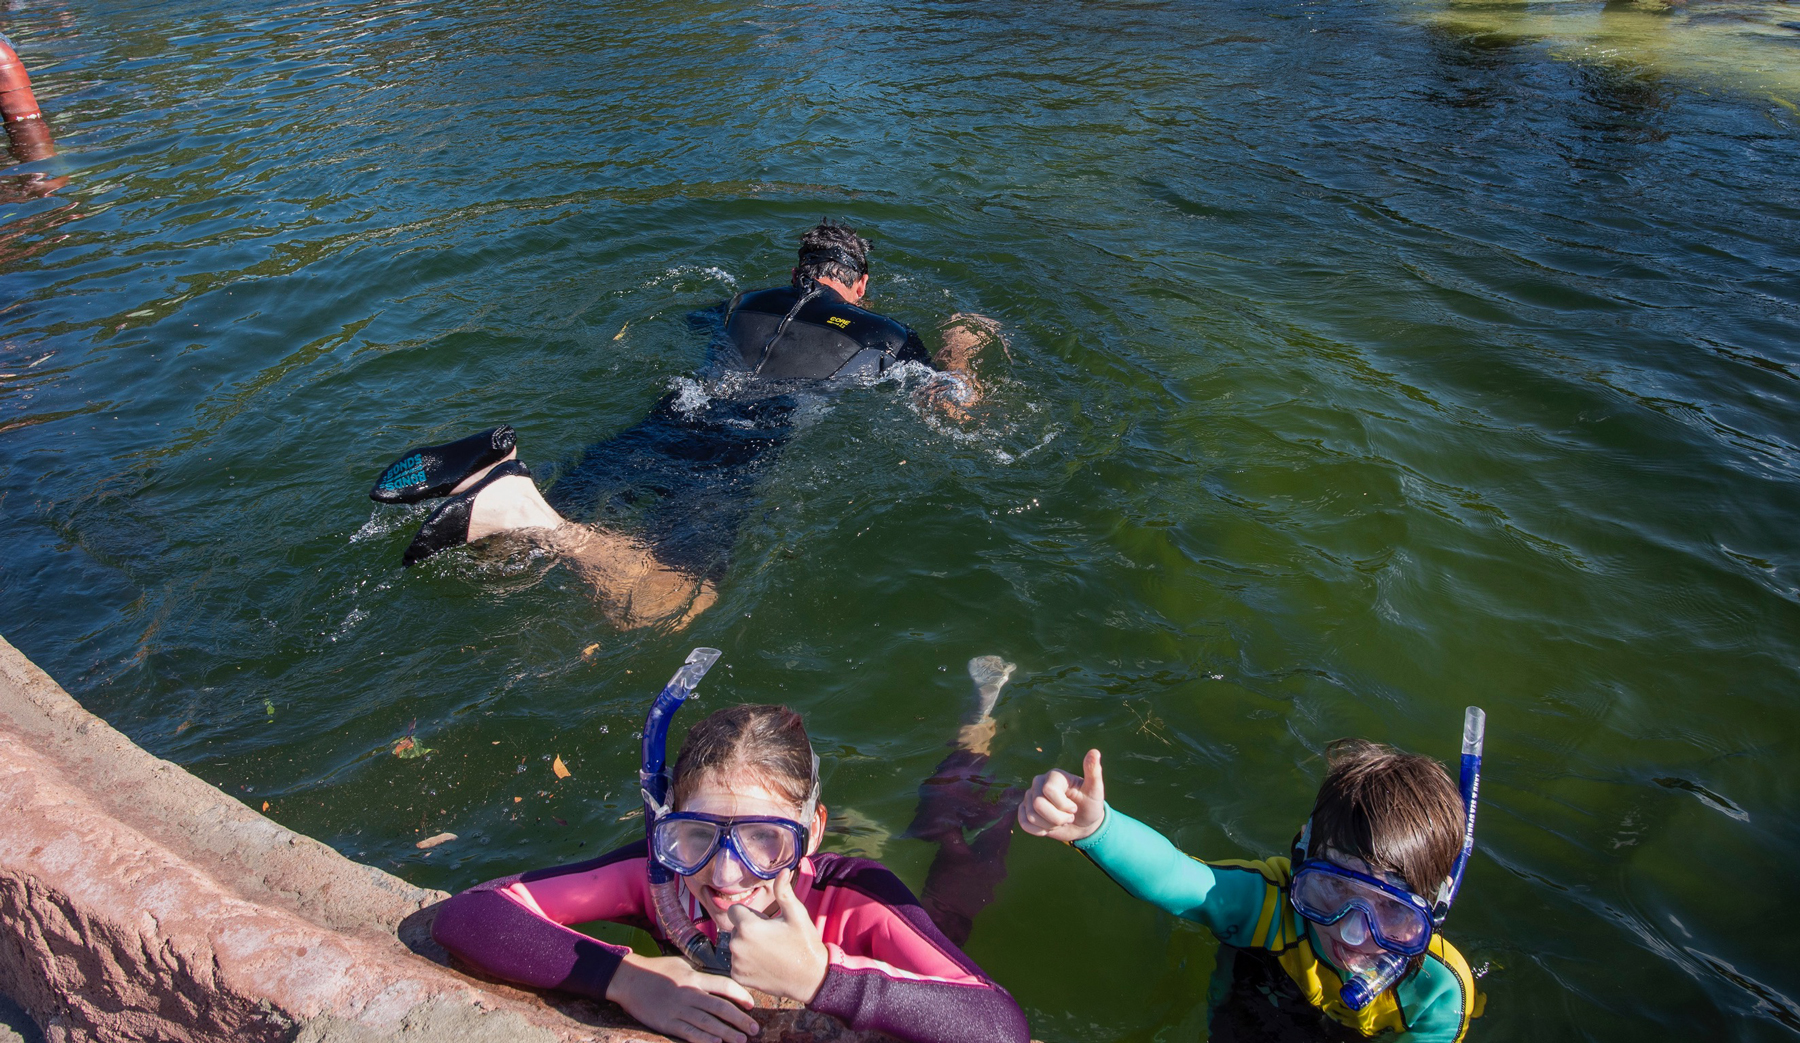 Stingray Snorkel $60 packaged with Entry Pass (aged 12+)